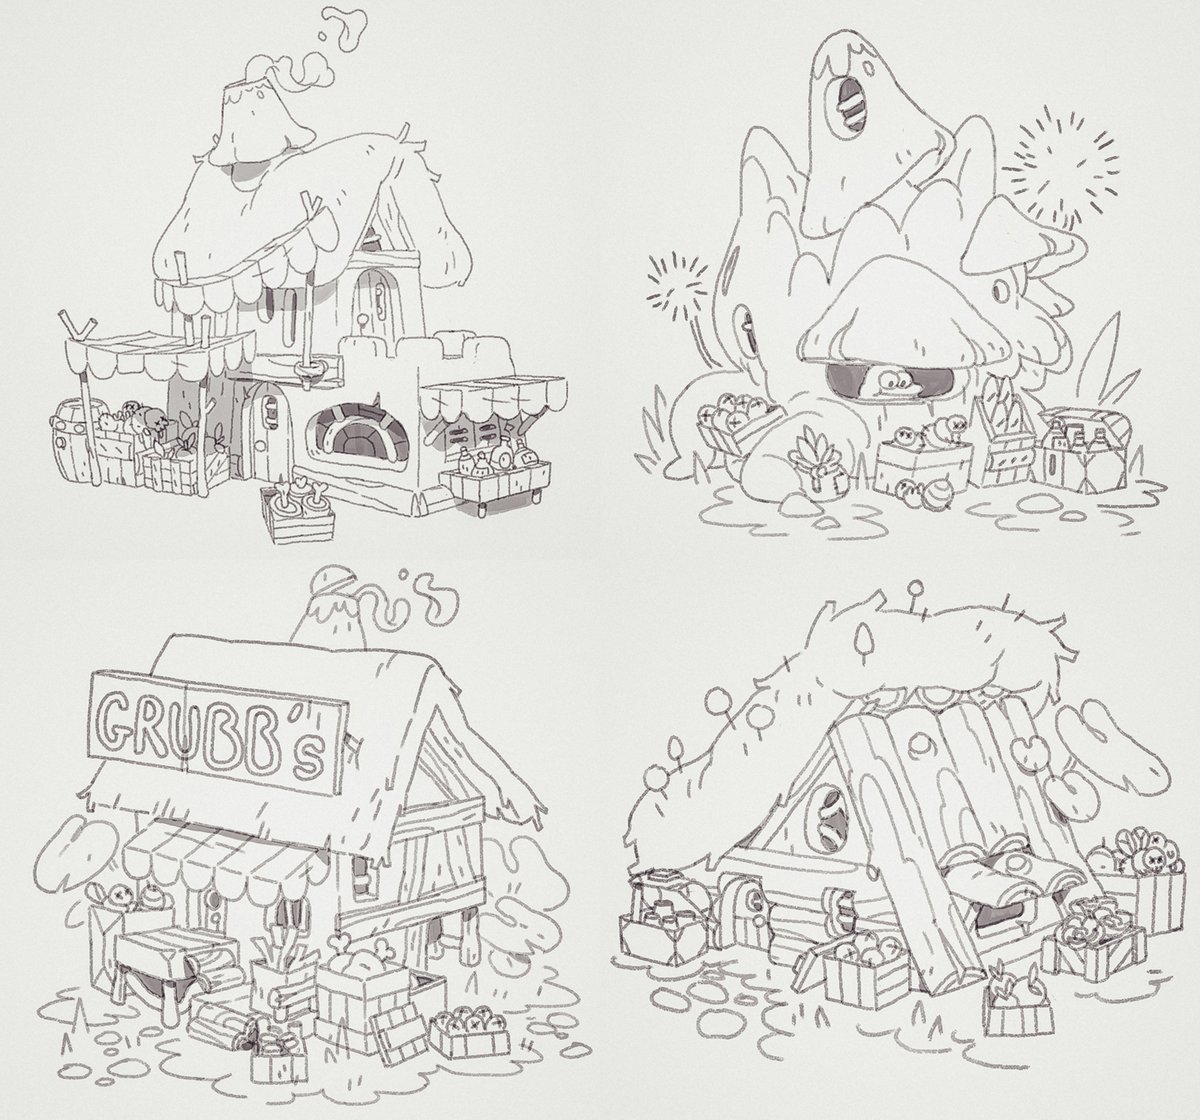 Little concepts for grubb's market, stumpy's and the bank i've done on amphibia season 1 